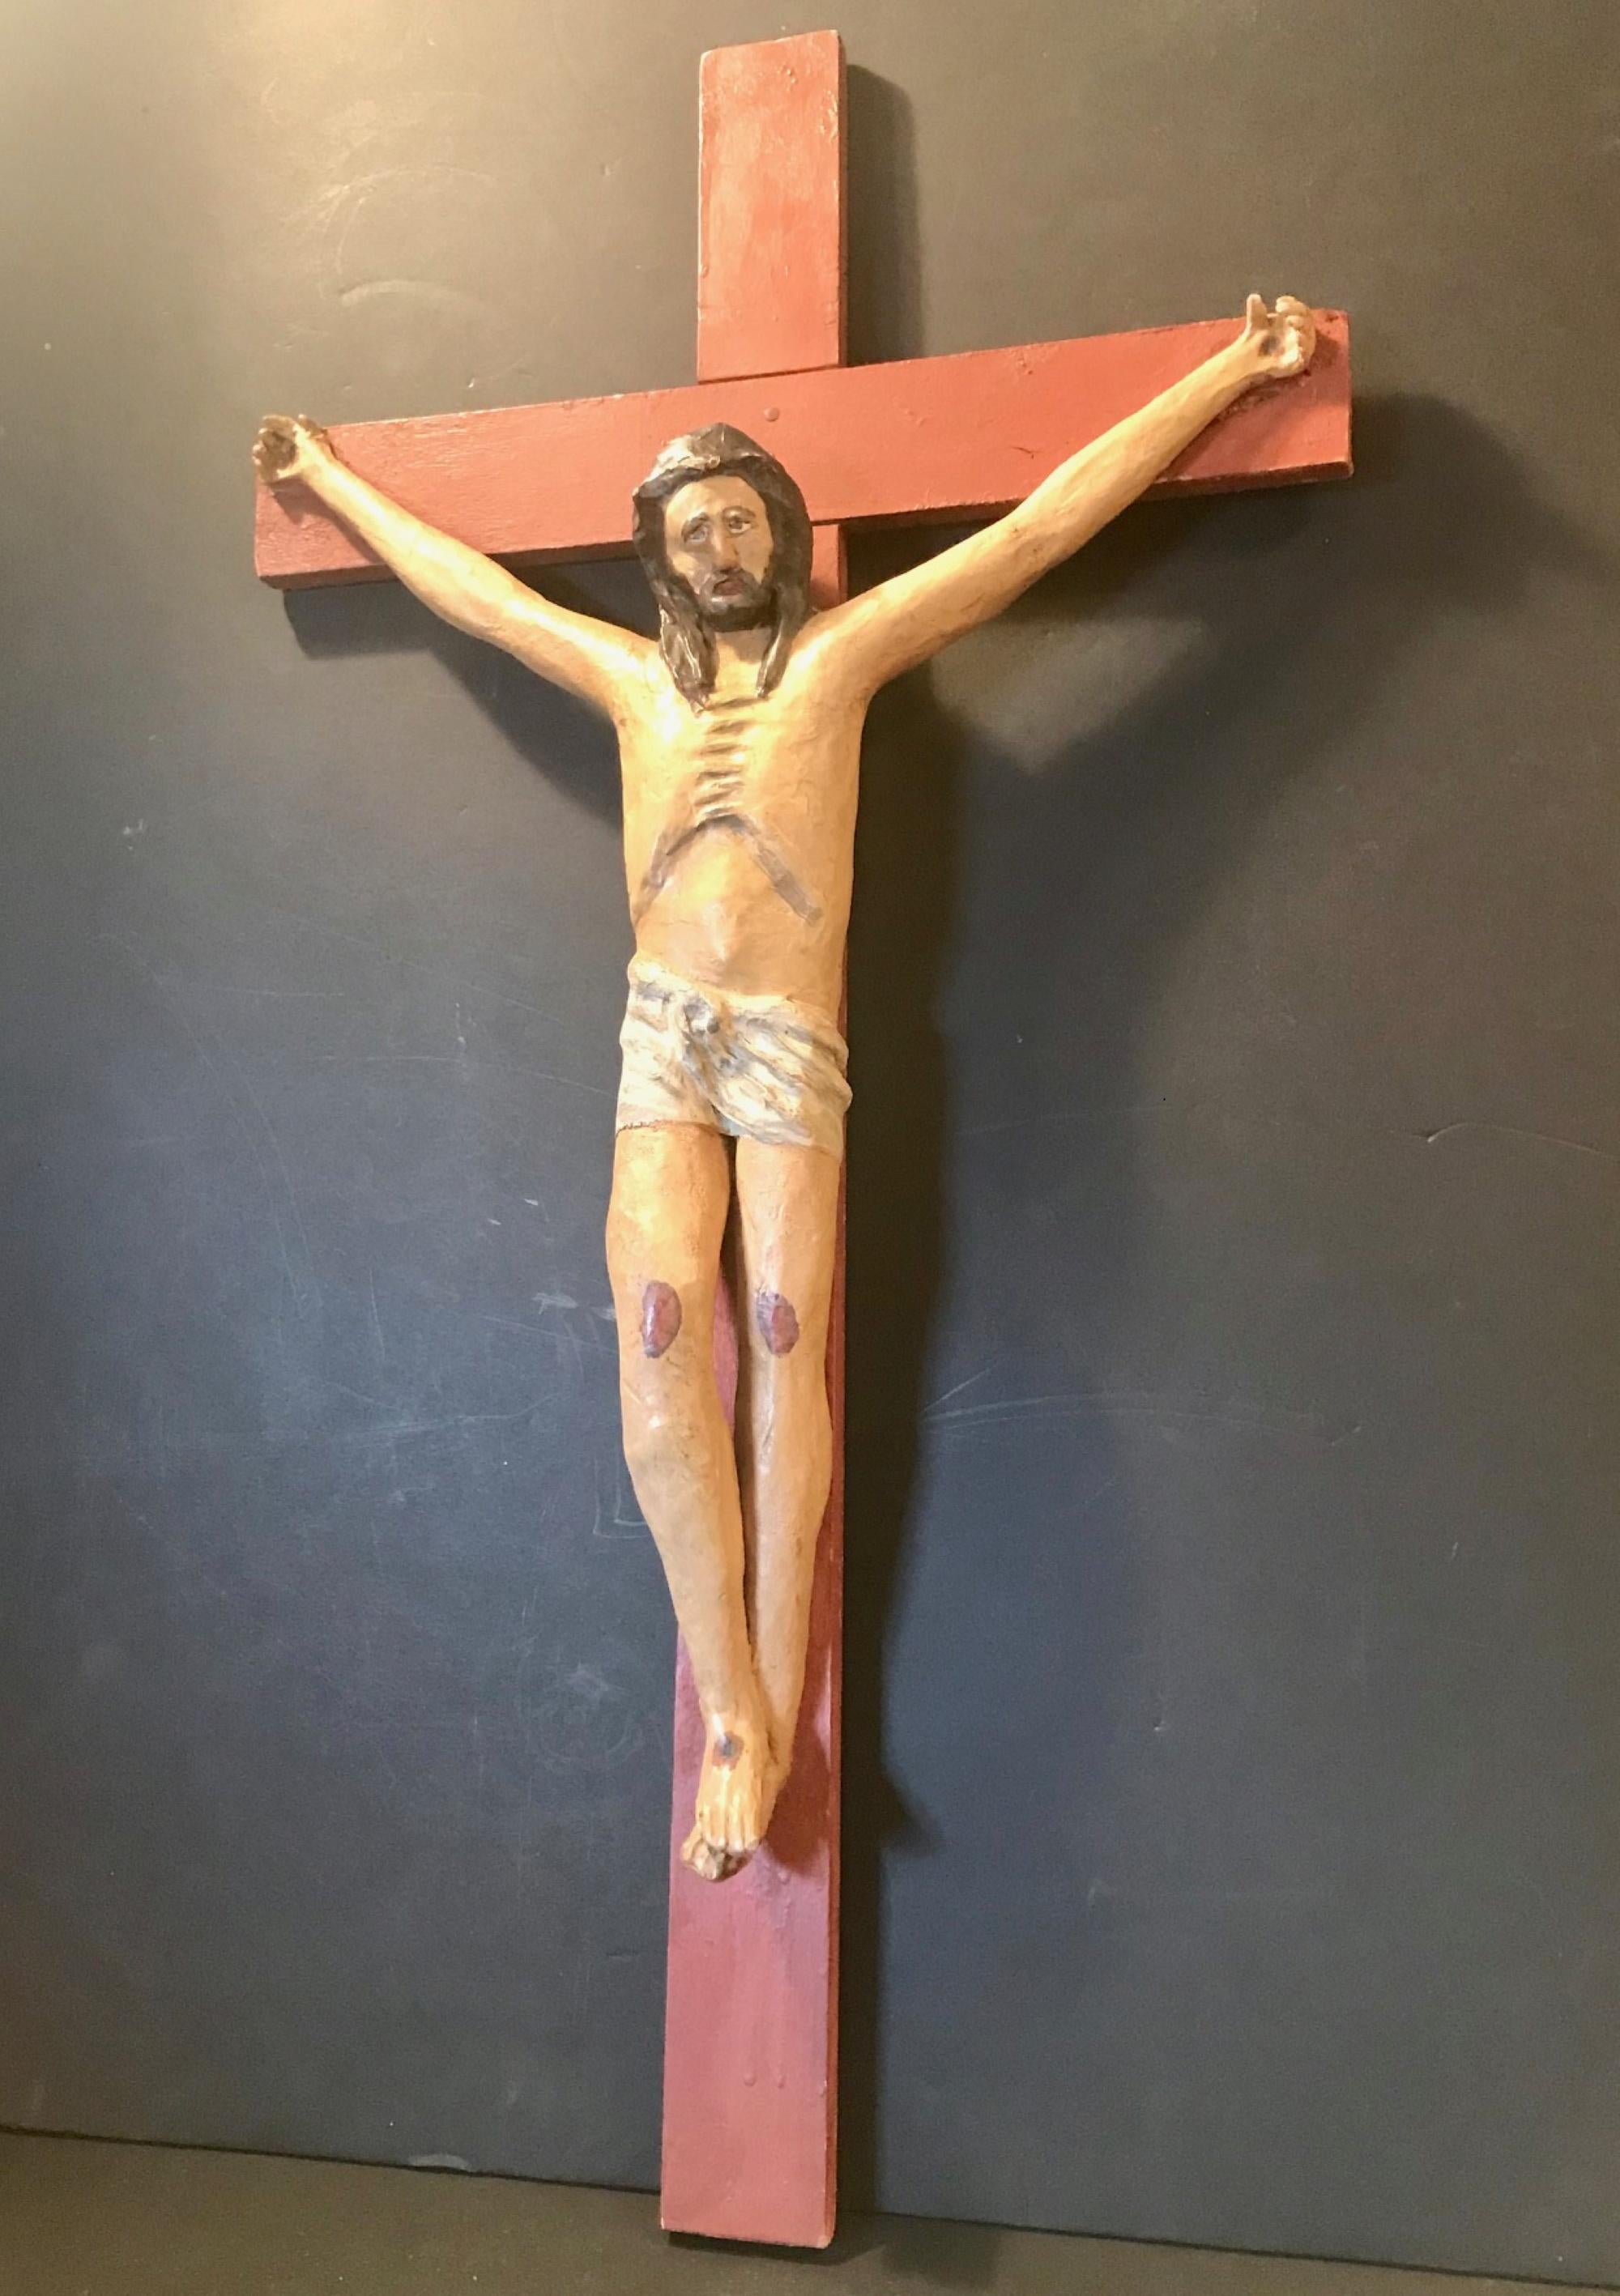 Late 19th-early 20th century New Mexico carved crucifix, circle of Jose Benito Ortega.

This Folk Art crucifix from New Mexico is from the late 19th-early 20th century shares all the characteristics of the best santos carver Jose Benito Ortega.